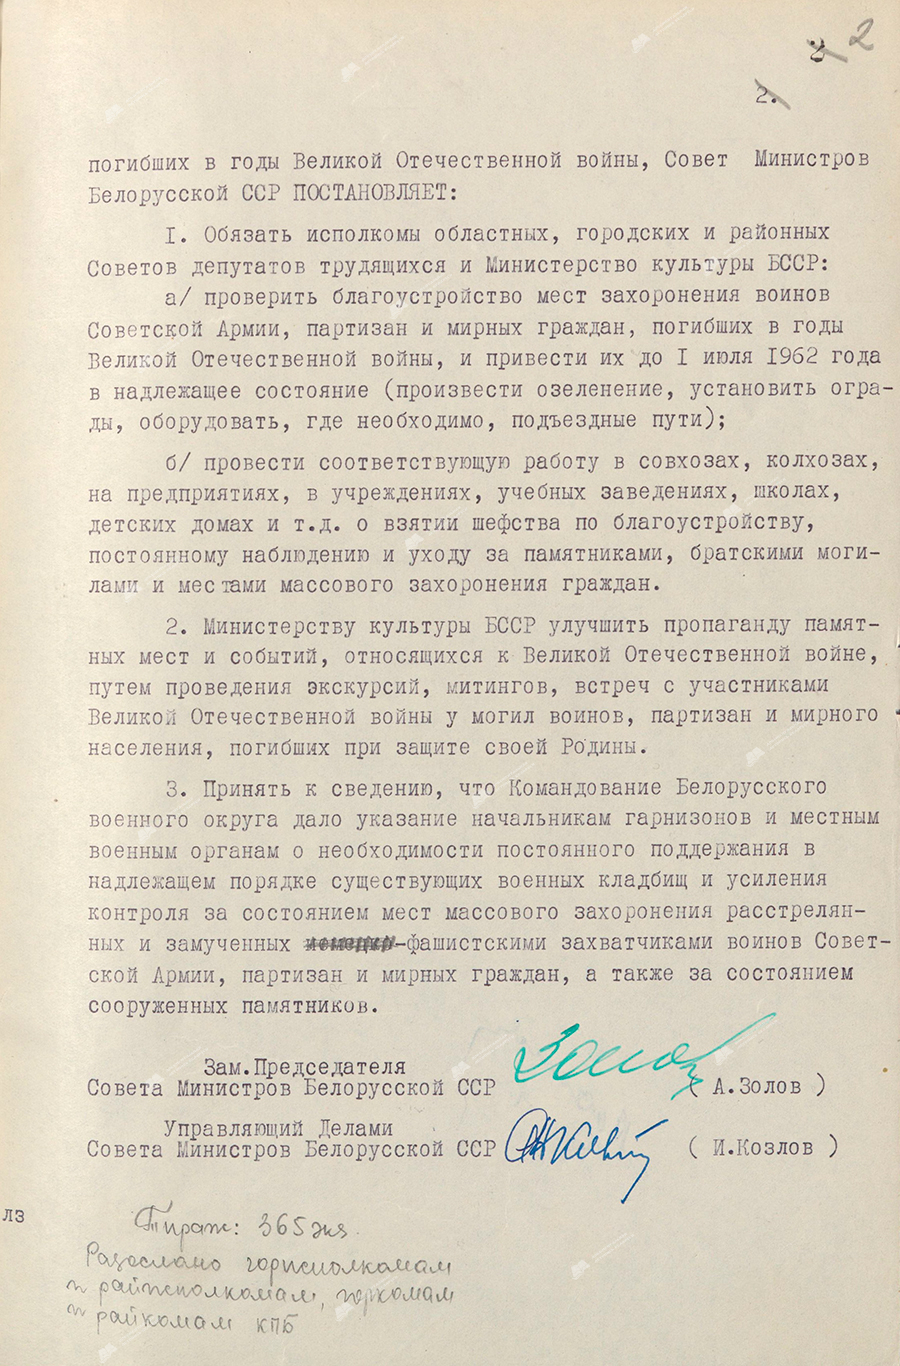 Resolution No. 674 of the Council of Ministers of the BSSR «On the proper maintenance of monuments and burial places of soldiers of the Soviet Army, partisans and civilians who died during the Great Patriotic War (1941 – 1945)»-с. 1